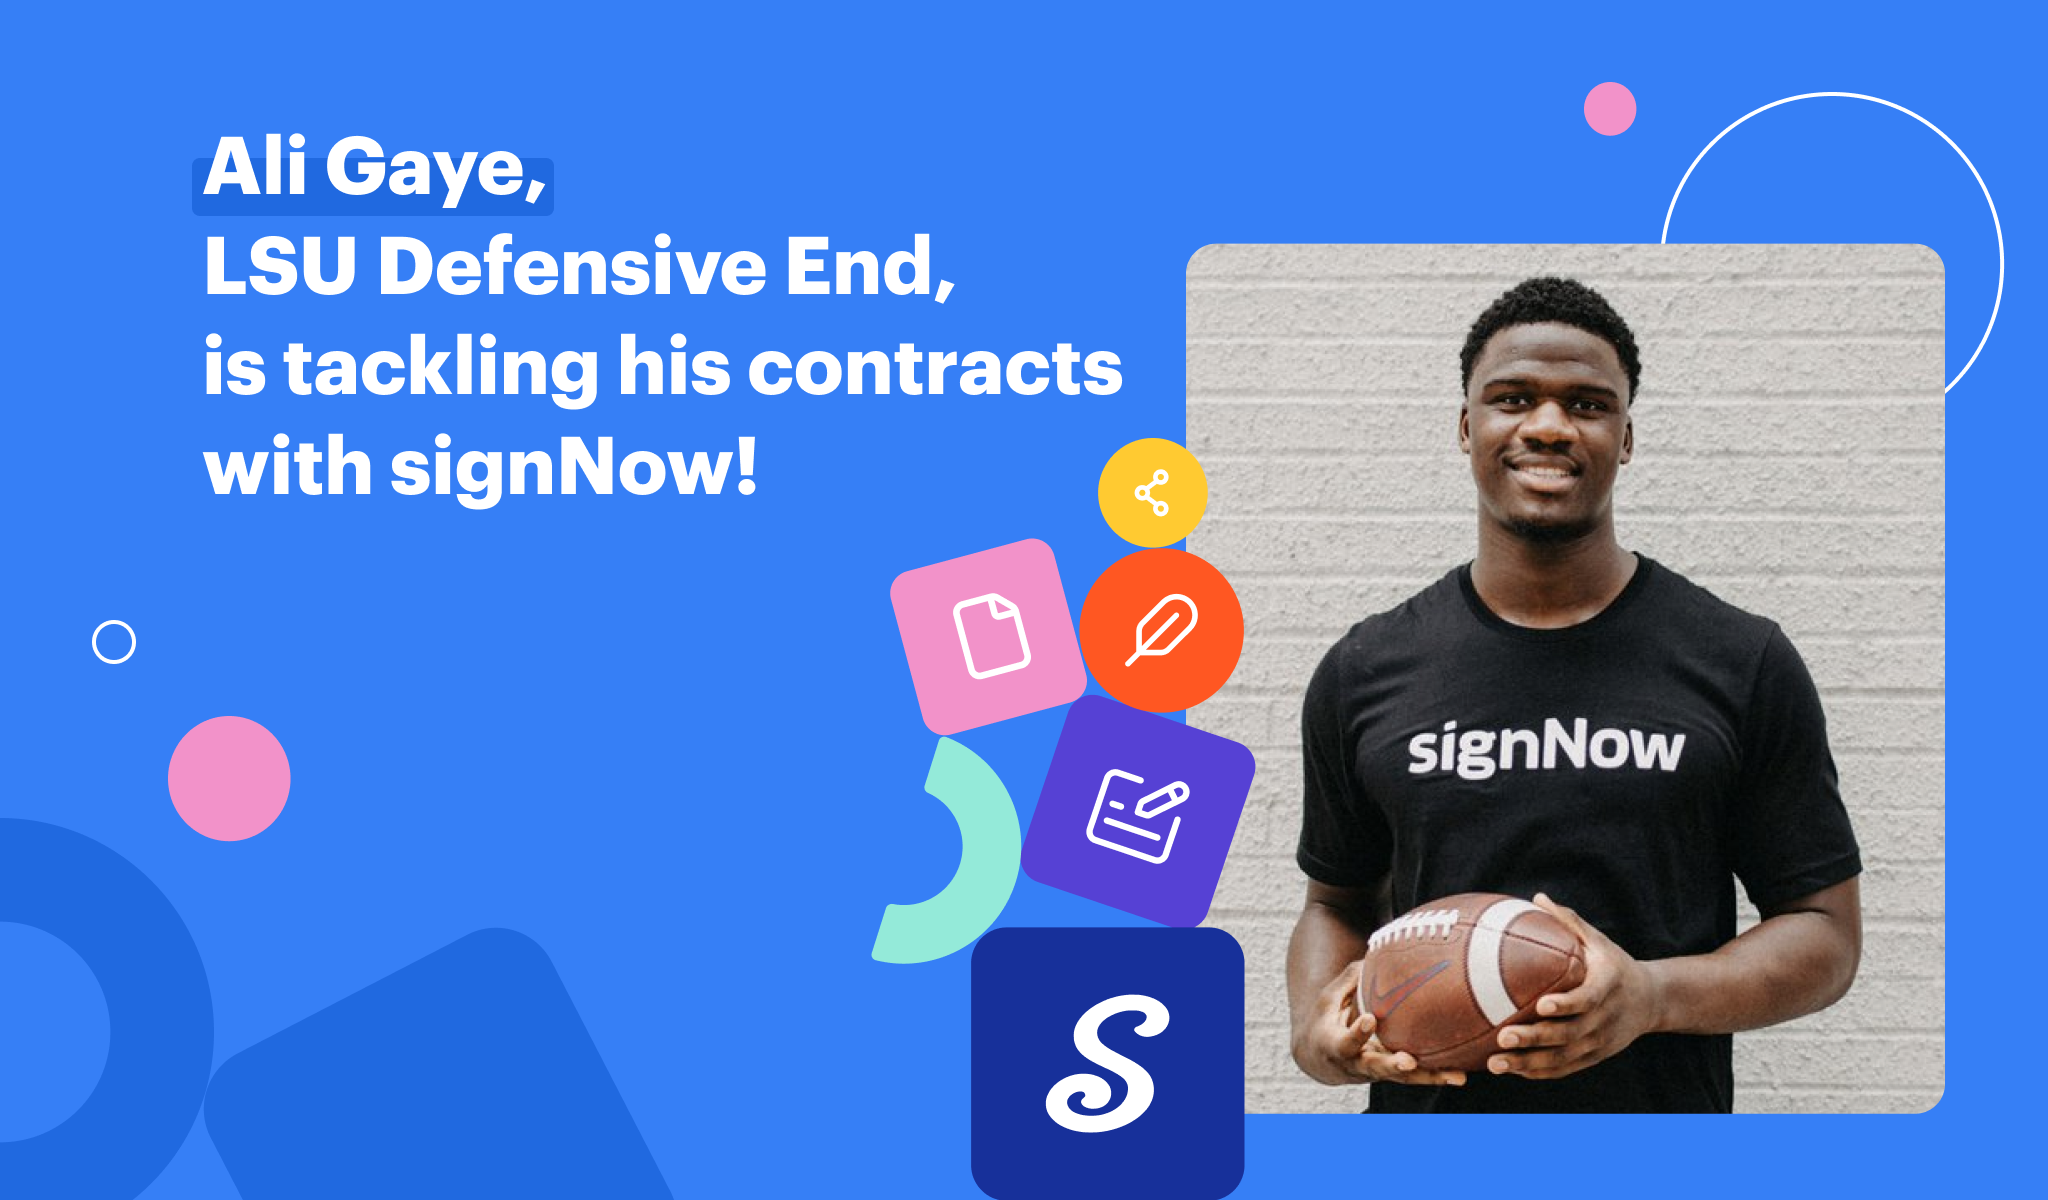 Ali Gaye LSU defensive end is tackling his contracts with signNow